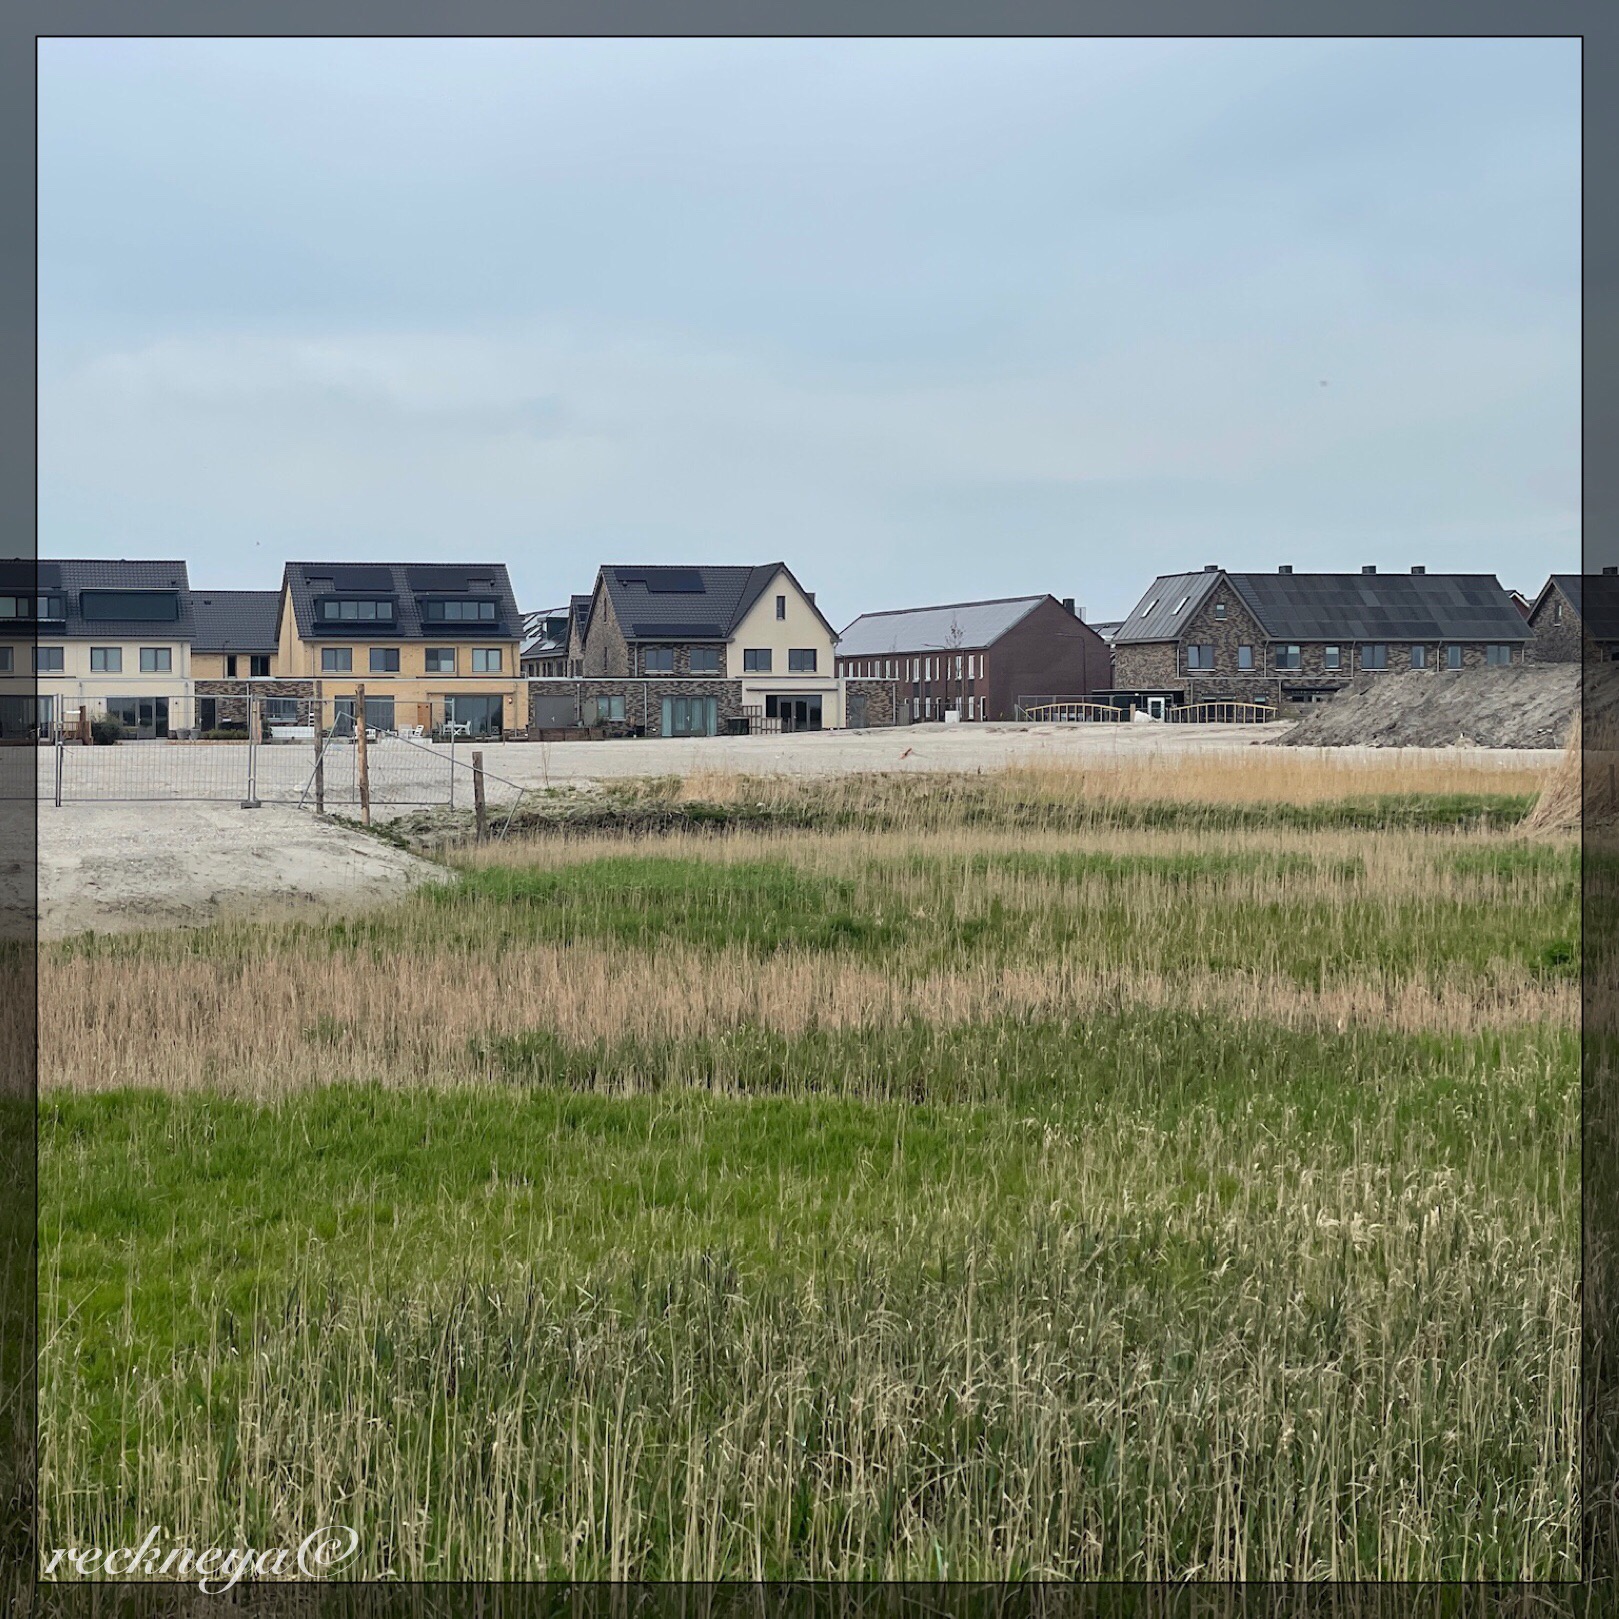 Photo taken in Roelofarendsveen. These are newly built houses. Their yards are small, and very few do not come with solar panels. They were built on former farmland.